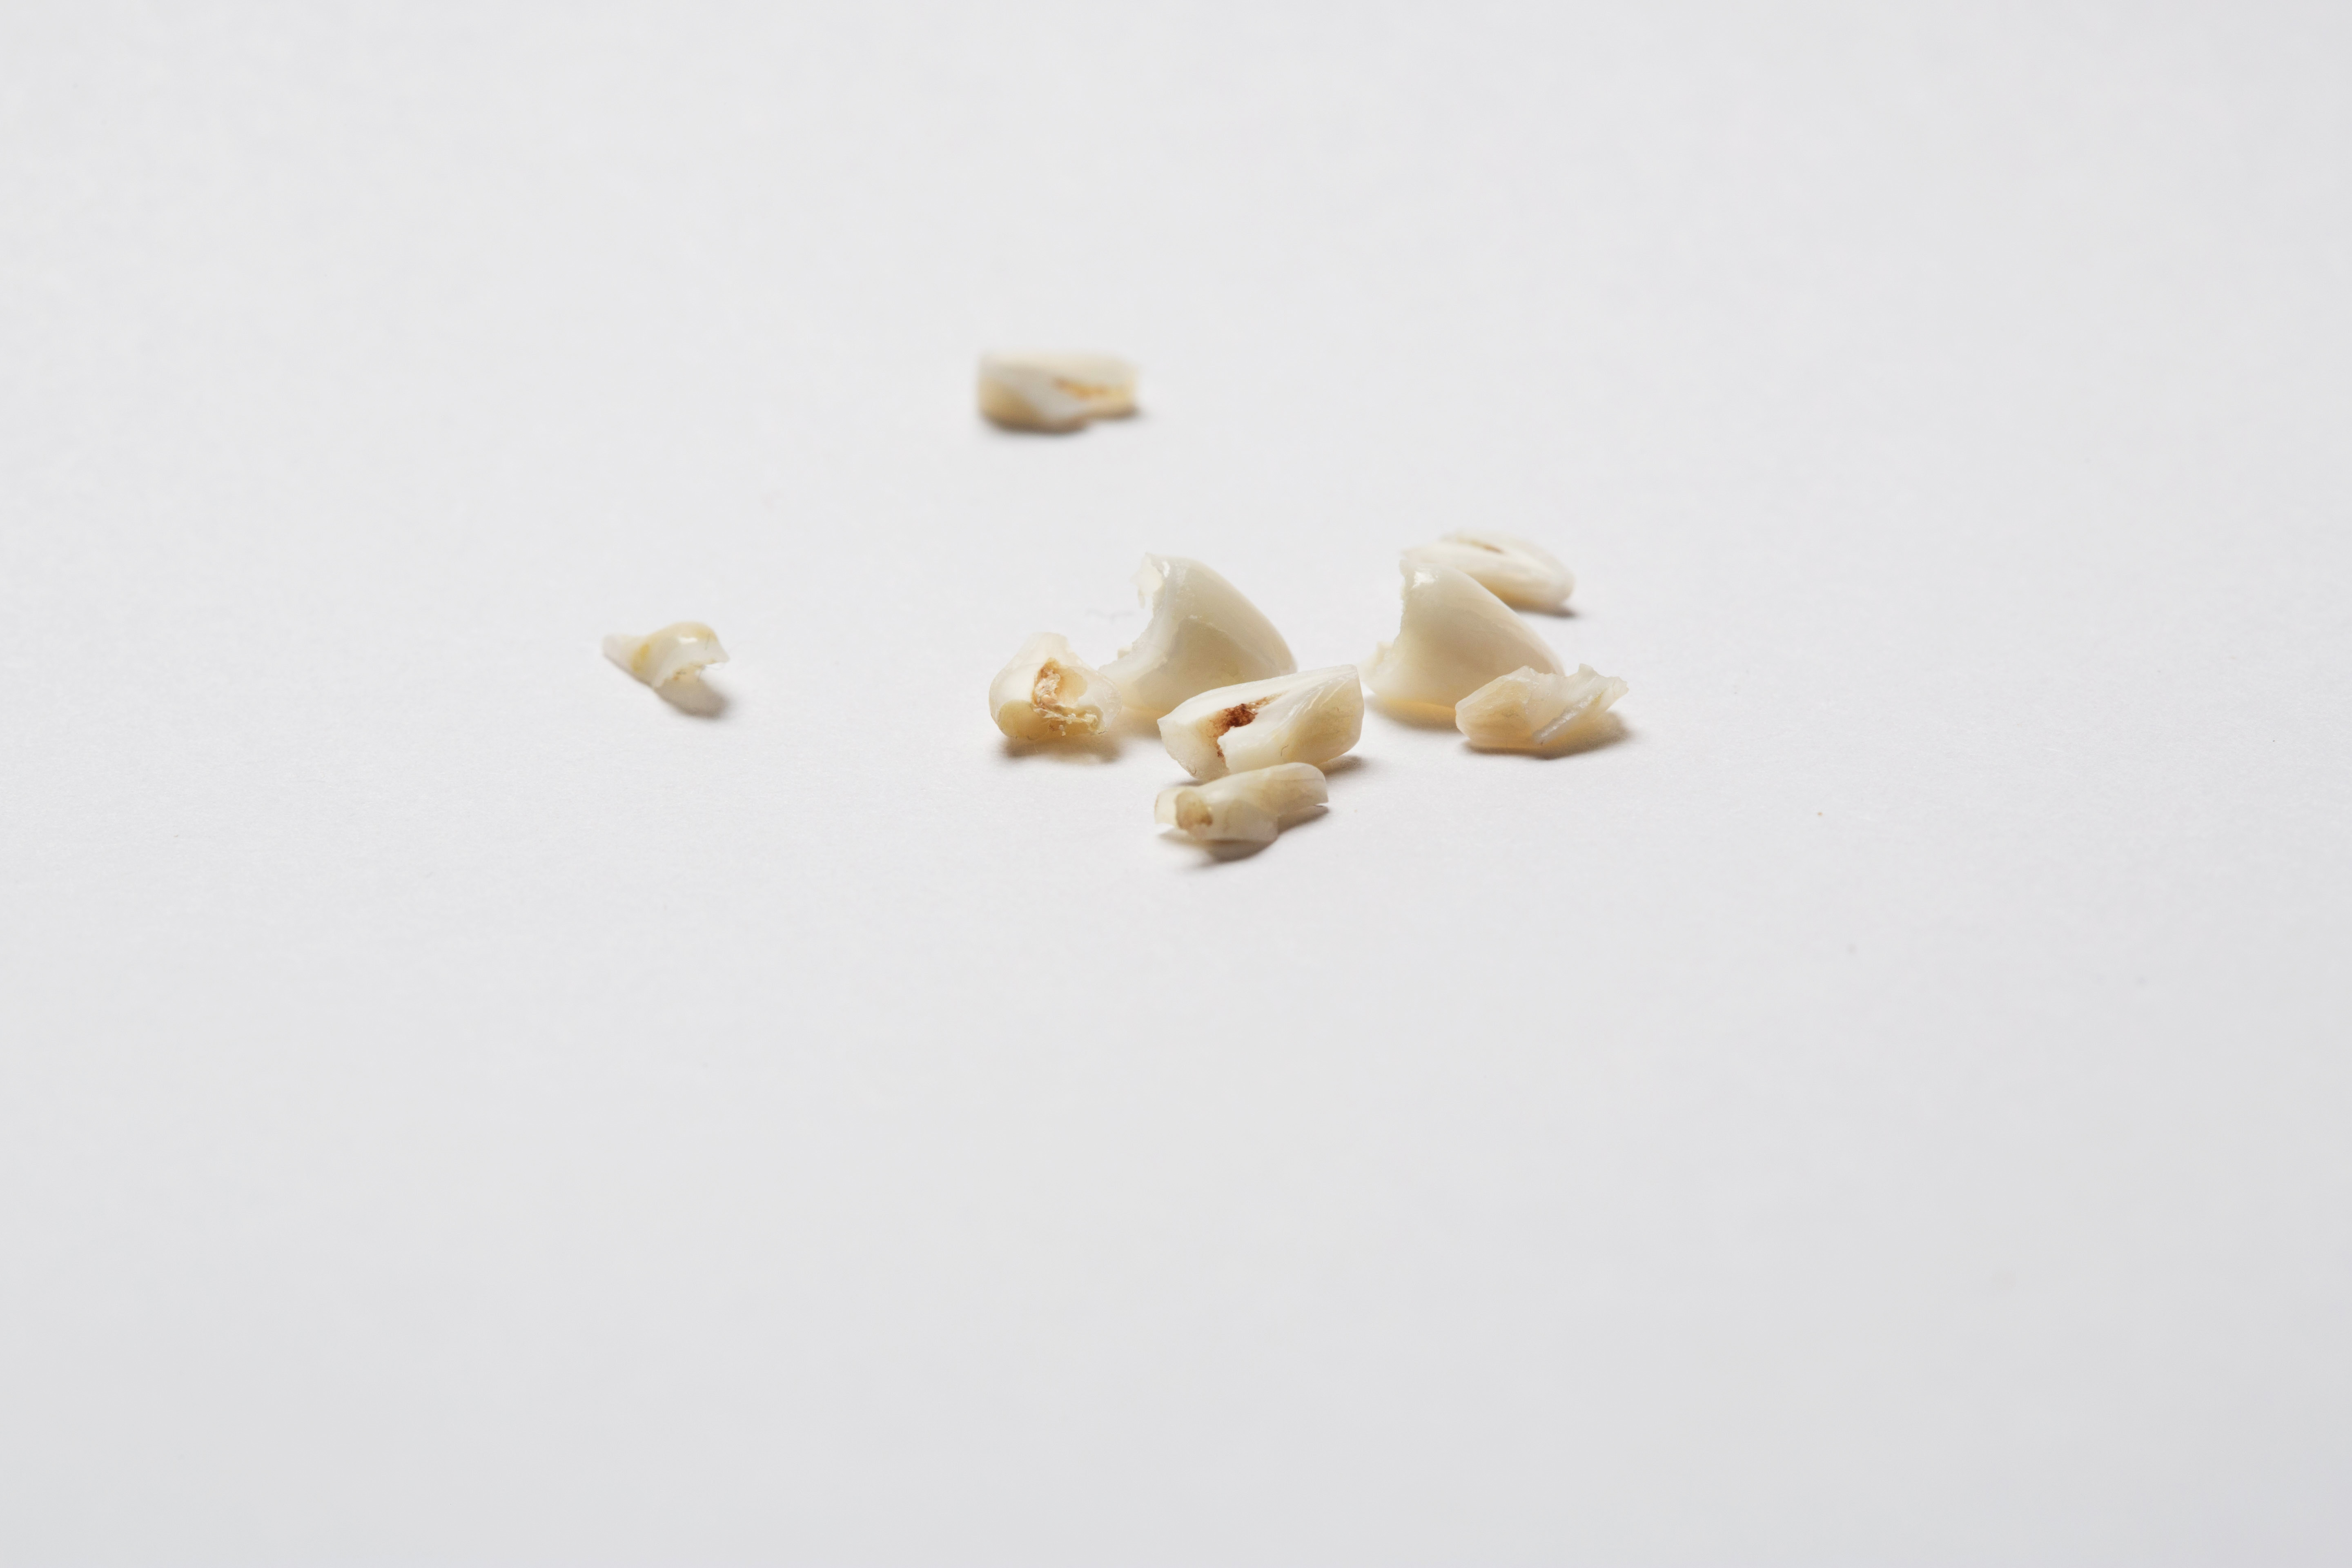 Photo: A close-up of a baby teeth strewn about.